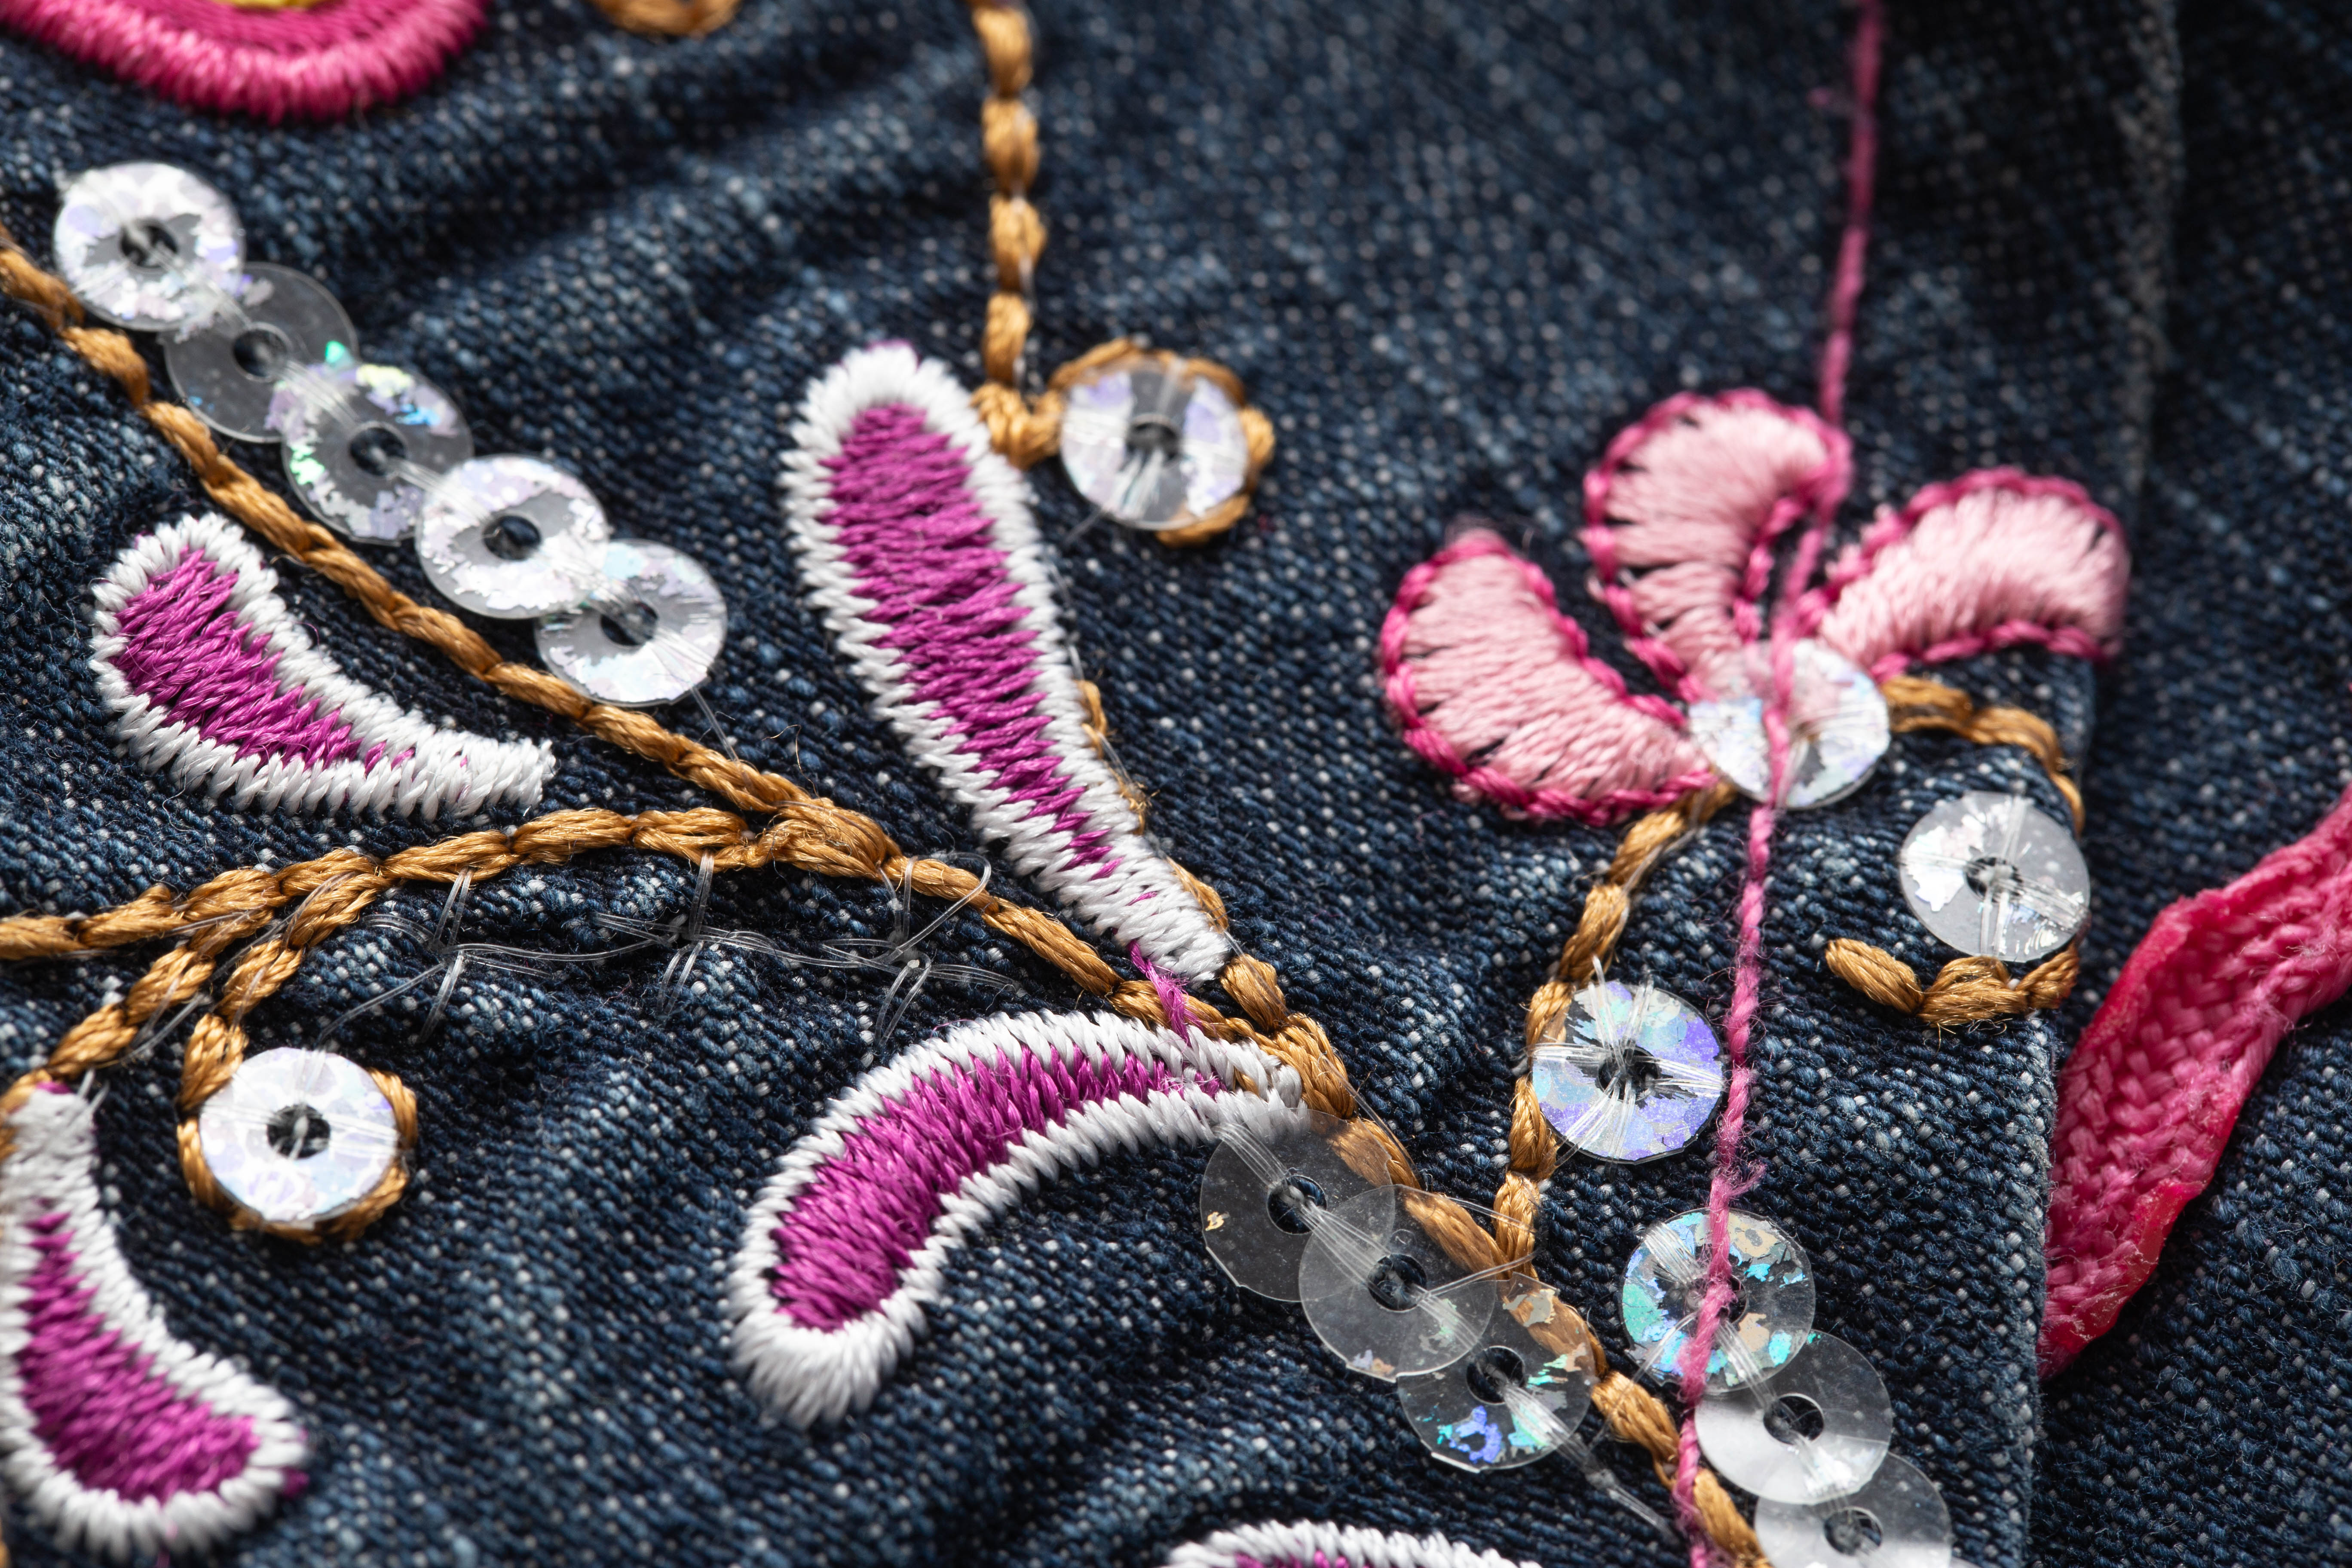 The Best Embroidery Machines in 2022